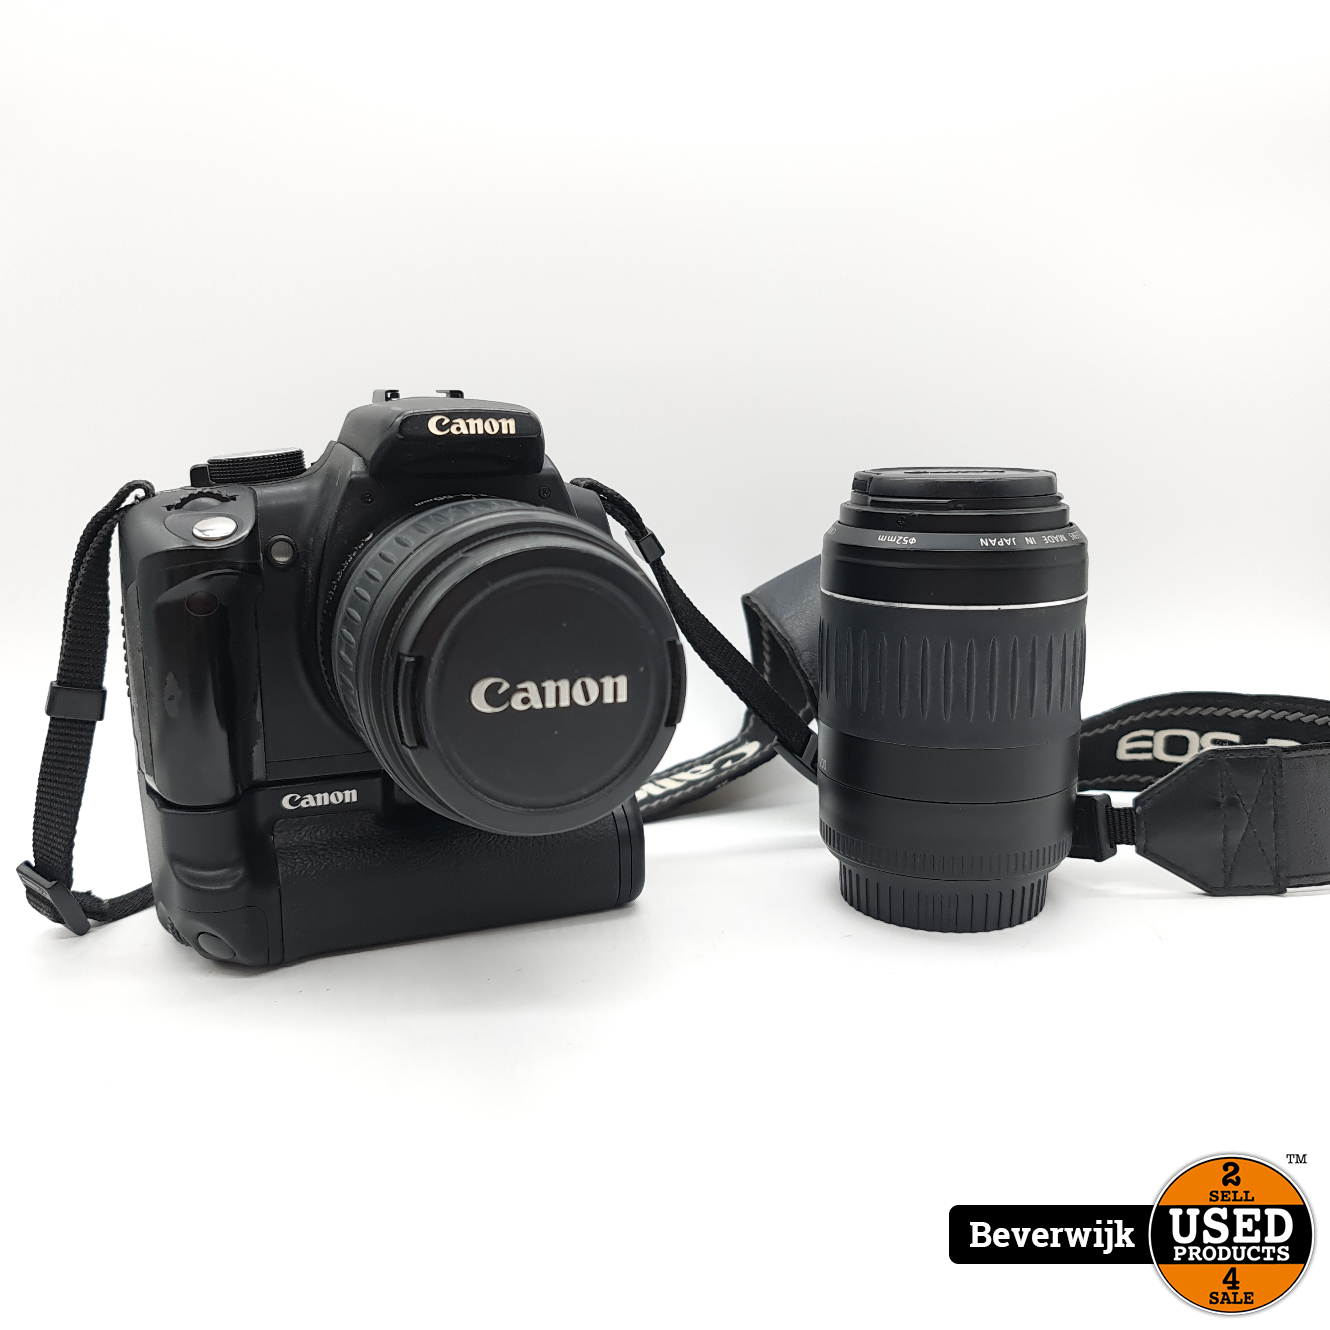 Canon EOS 350D Camera Complete Set - In Nieuwstaat! Used Products